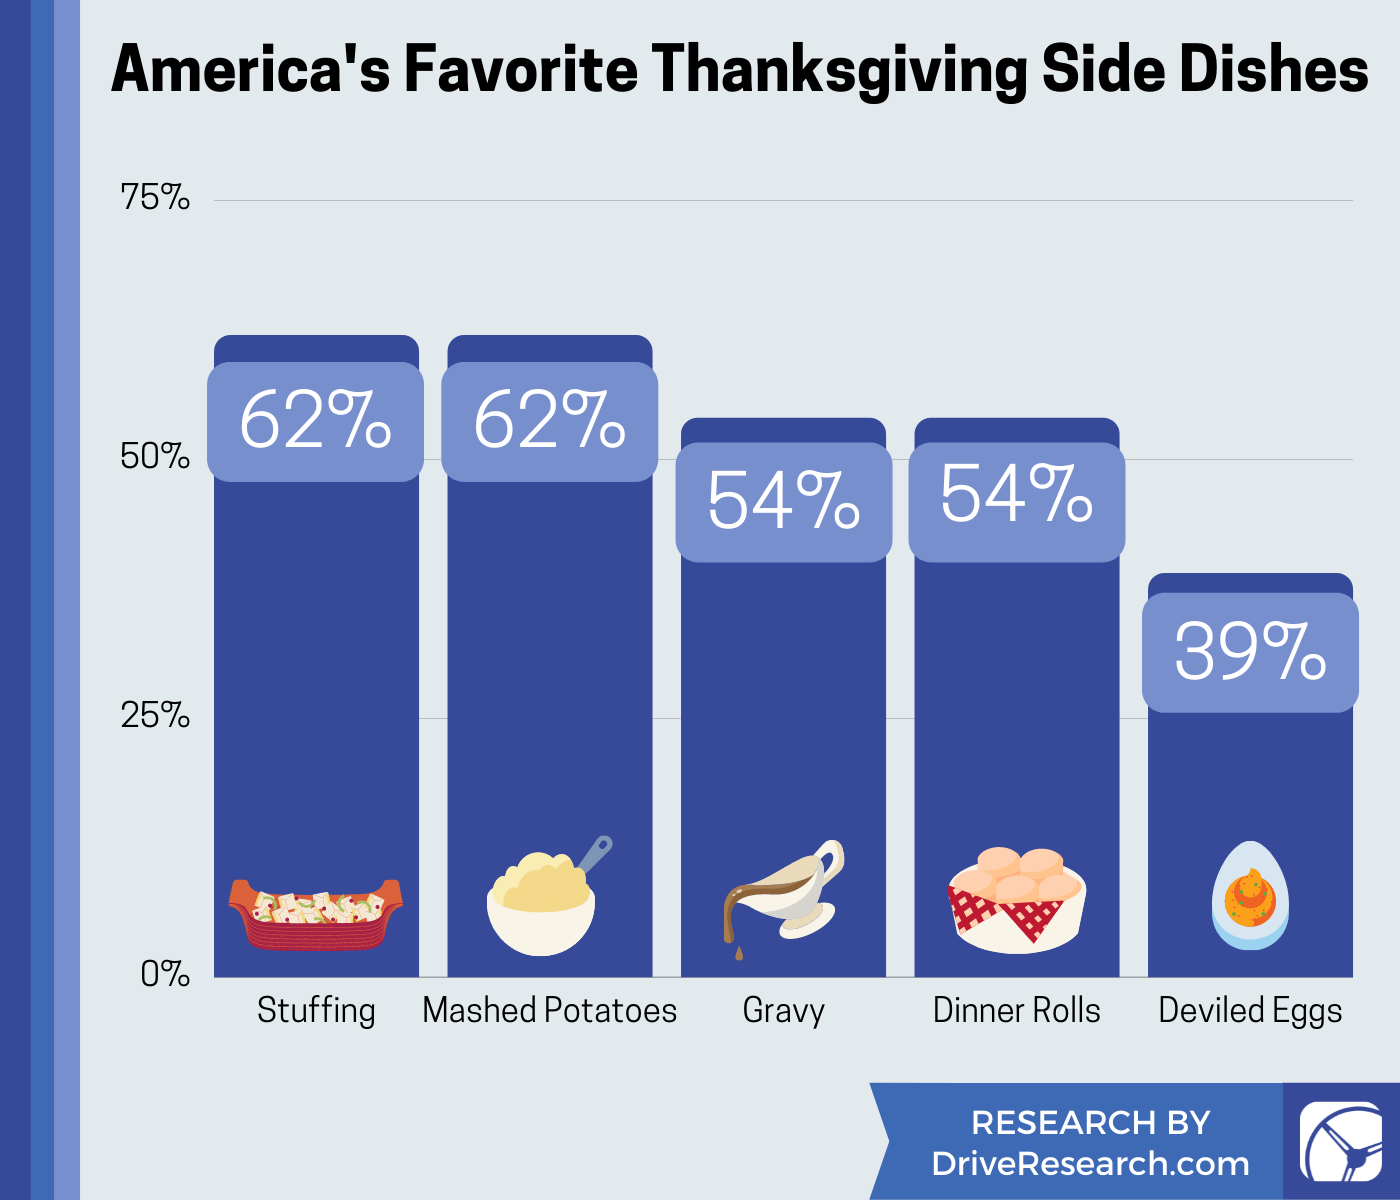 Stuffing and mashed potatoes are America’s favorite Thanksgiving side dishes.